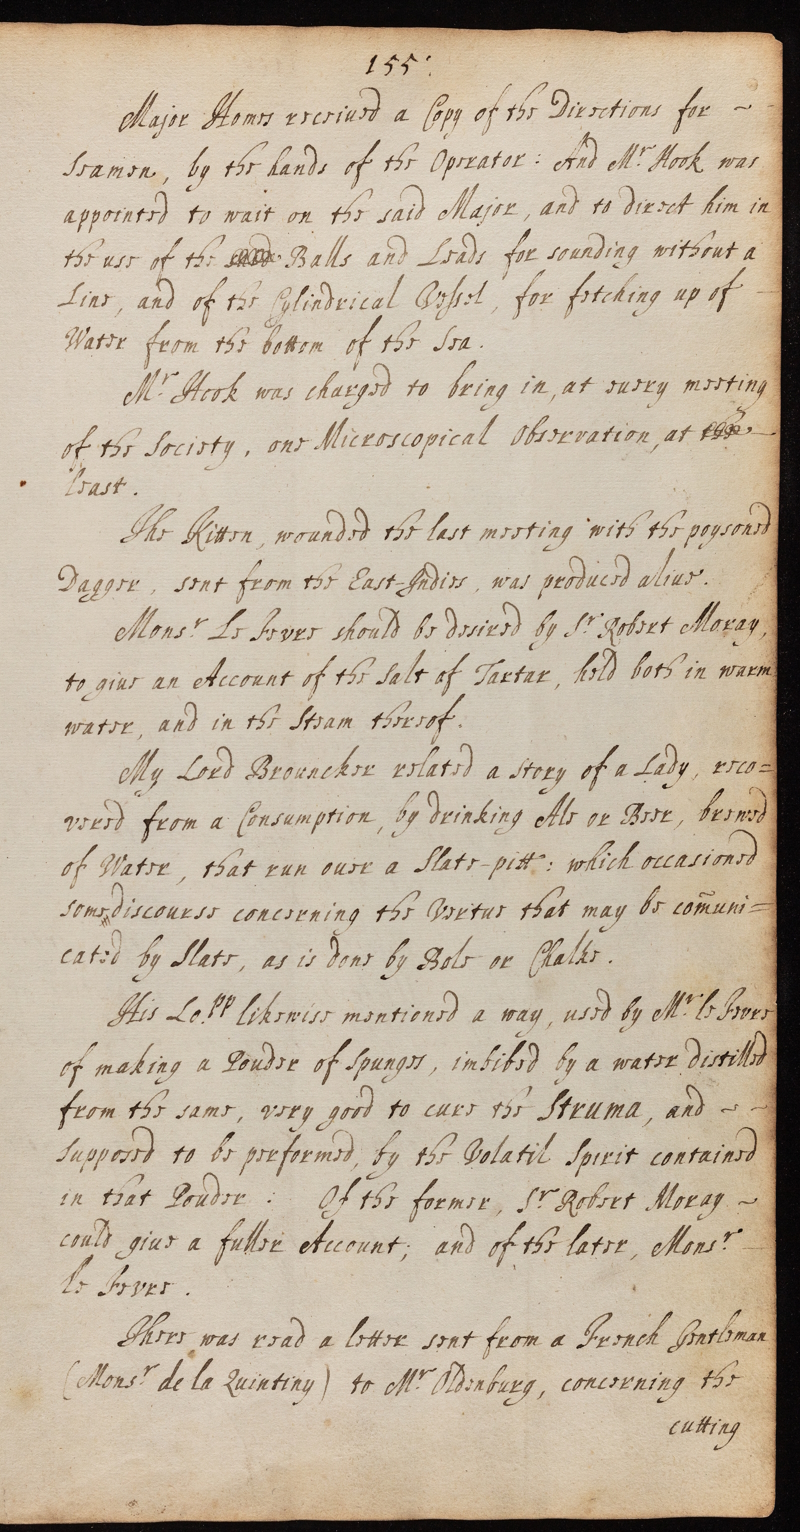 JBO/1/124: extract from Royal Society meeting minutes, 1 April 1663